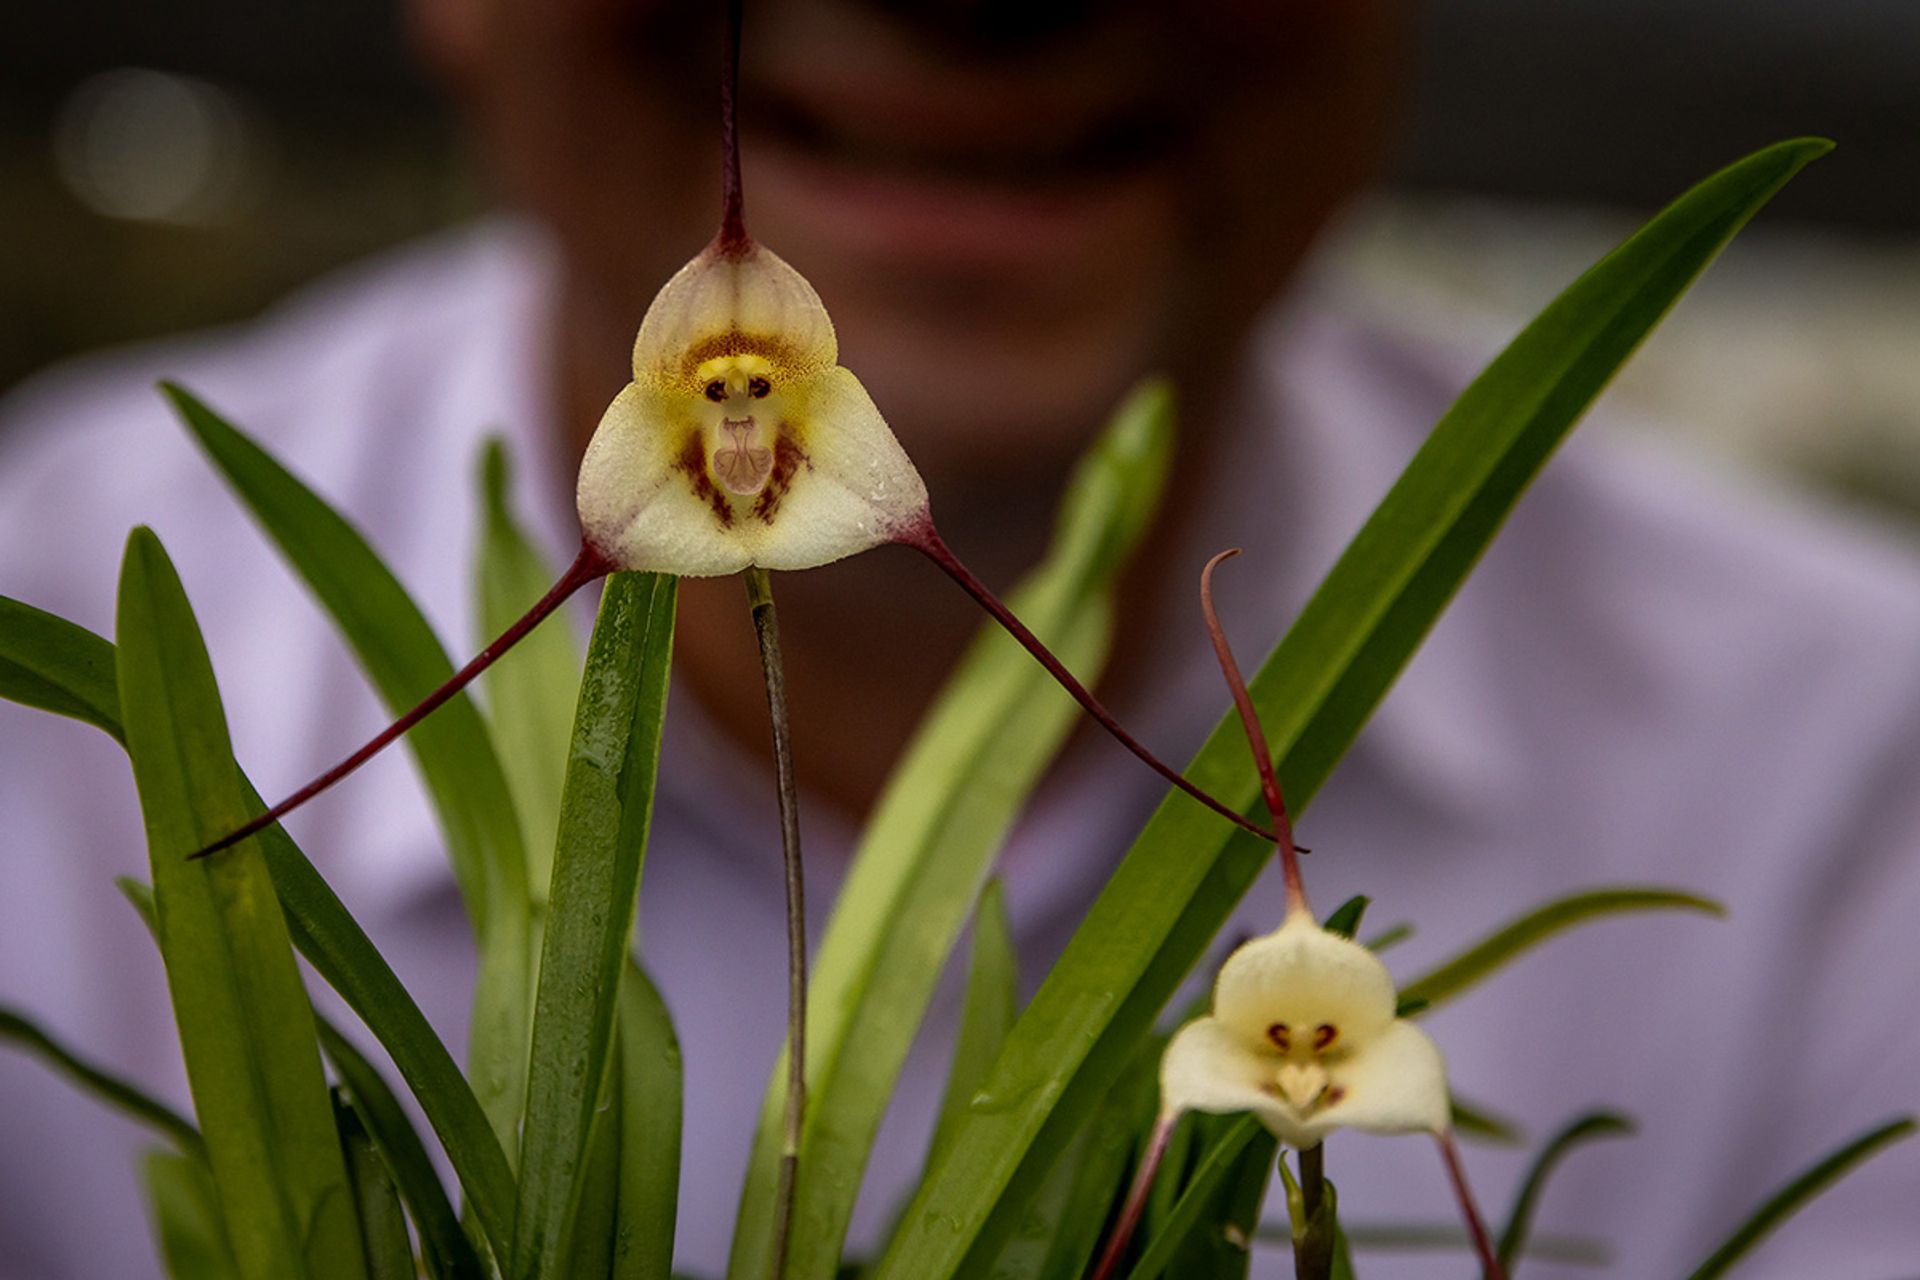 Mr Portilla shows the Gardens by the Bay horticulturalists a mother-and-son pair of miniature orchid in his nursery in Cuenca, Ecuador.